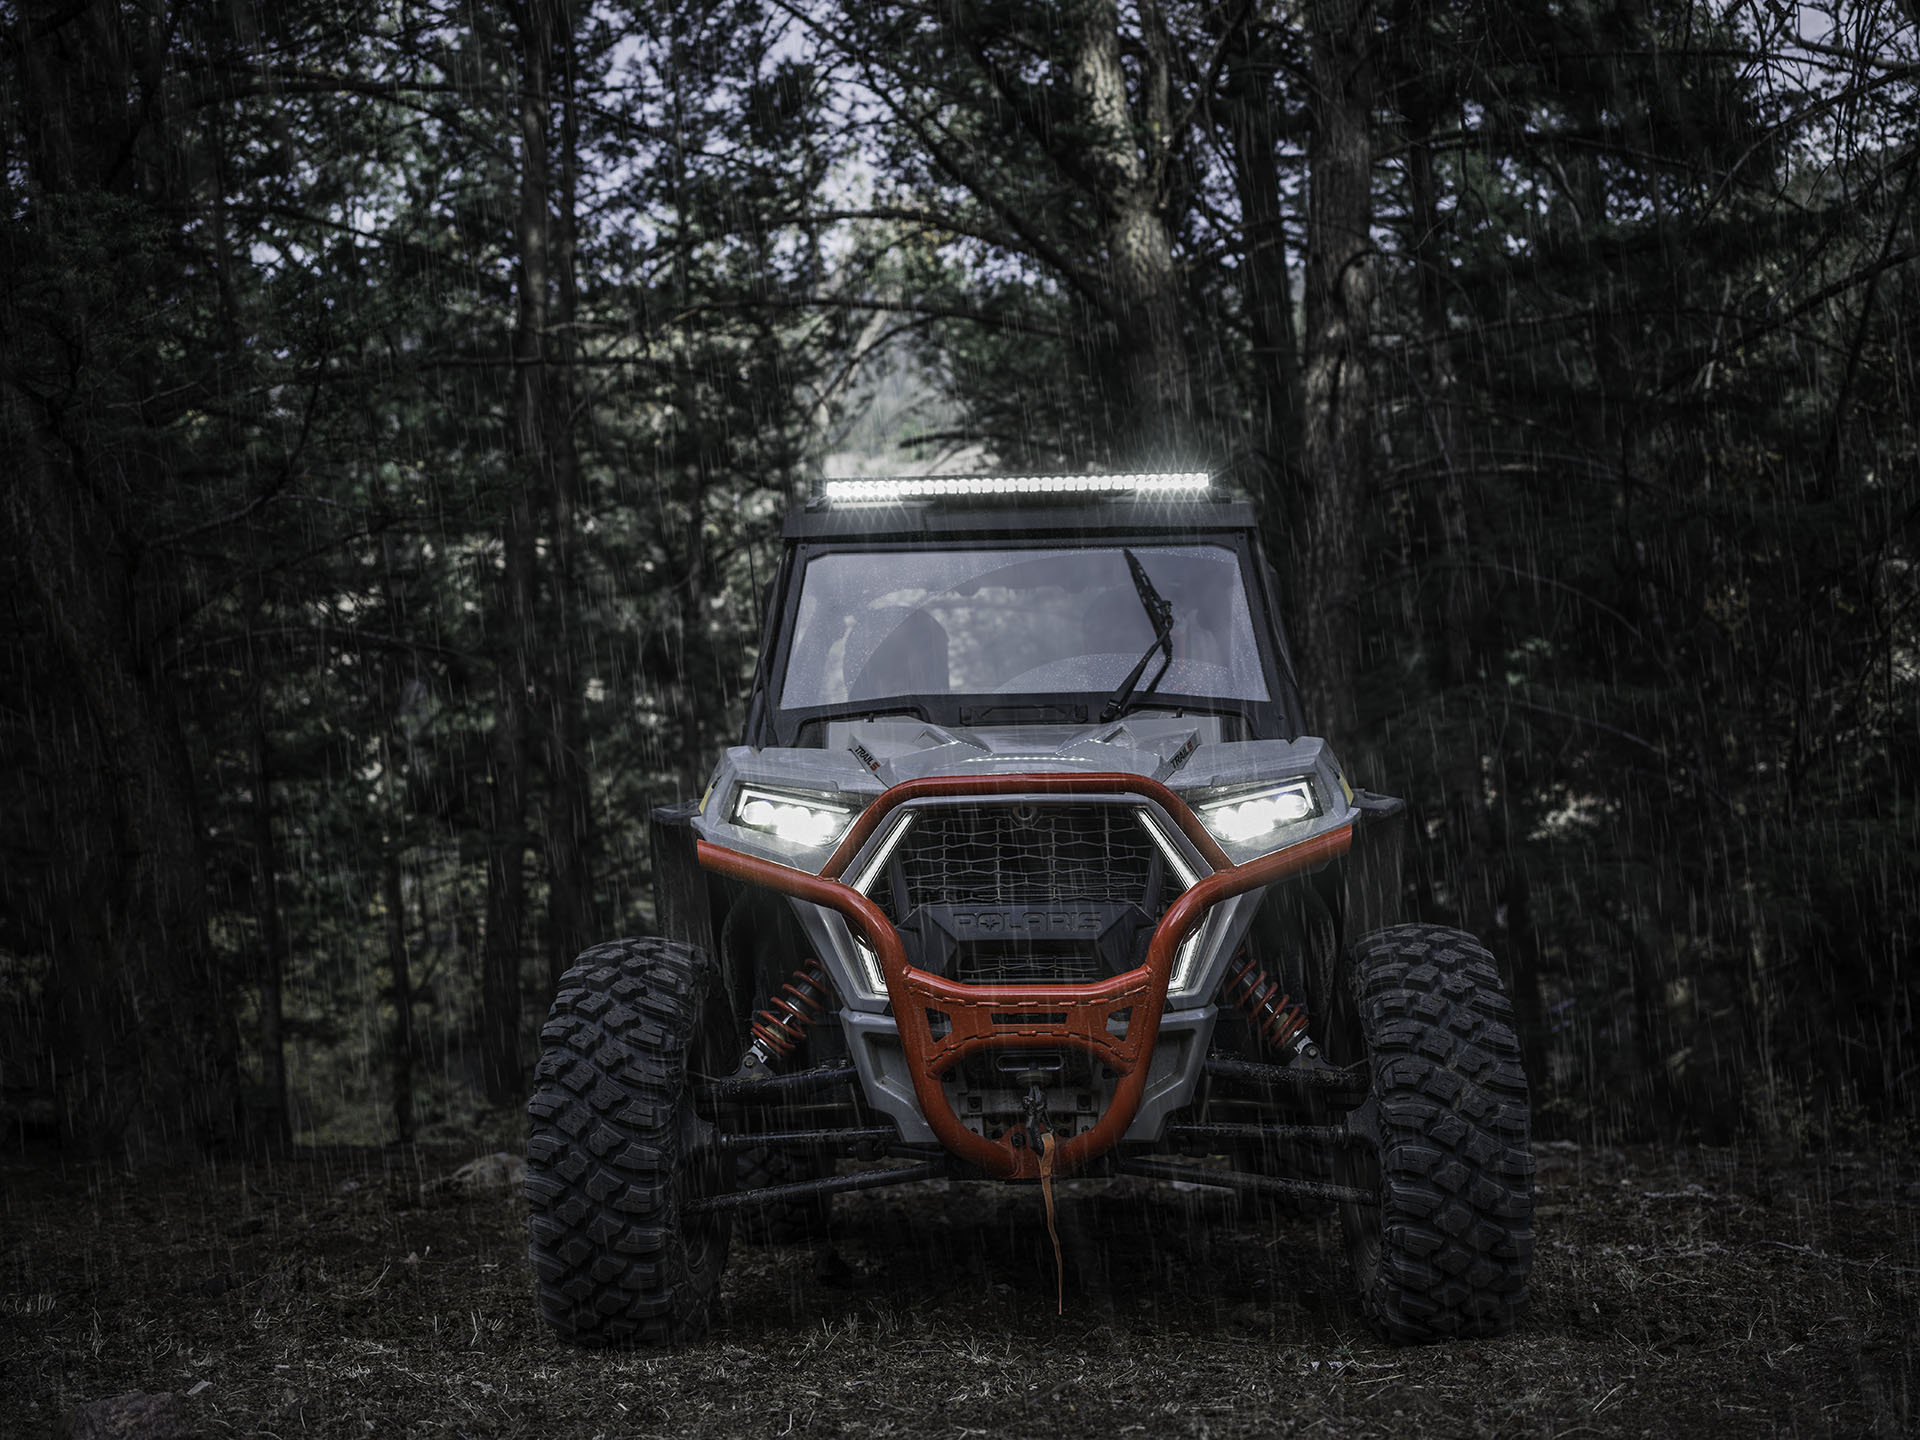 2023 Polaris RZR Trail S 1000 Ultimate in Loxley, Alabama - Photo 12